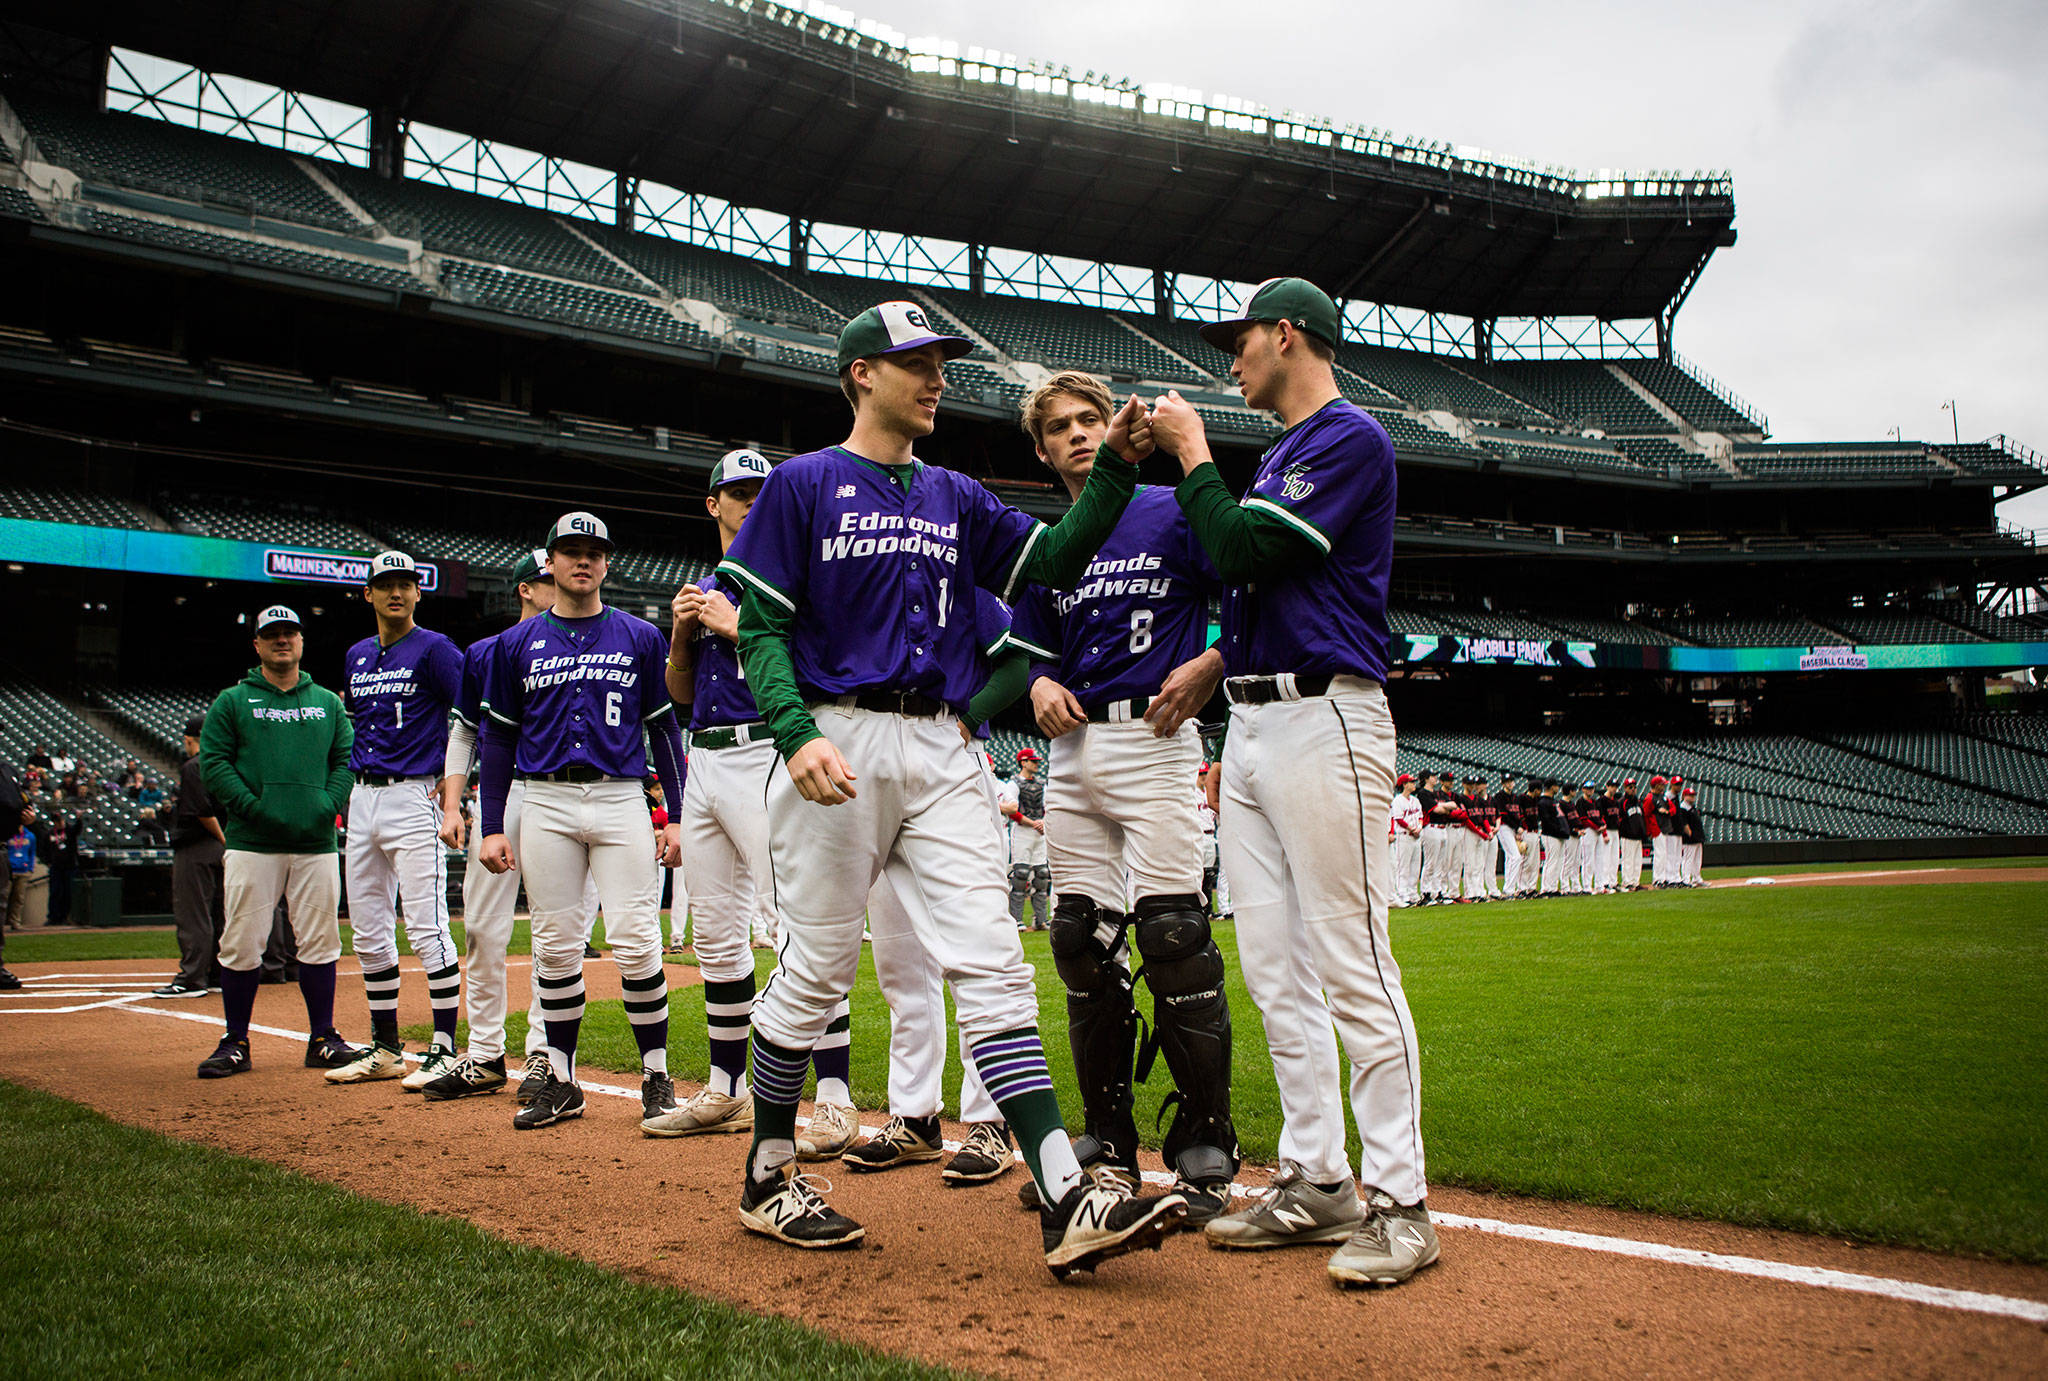 Edmonds-Woodway’s Karsen Tjarneberg walks down the first-base line and fist-bumps his teammates prior to Sunday’s game at T-Mobile Park, formerly known as Safeco Field. The Warriors faced Mount Si at the Seattle Mariners’ ballpark as part of the annual High School Baseball Classic. (Olivia Vanni / The Herald)